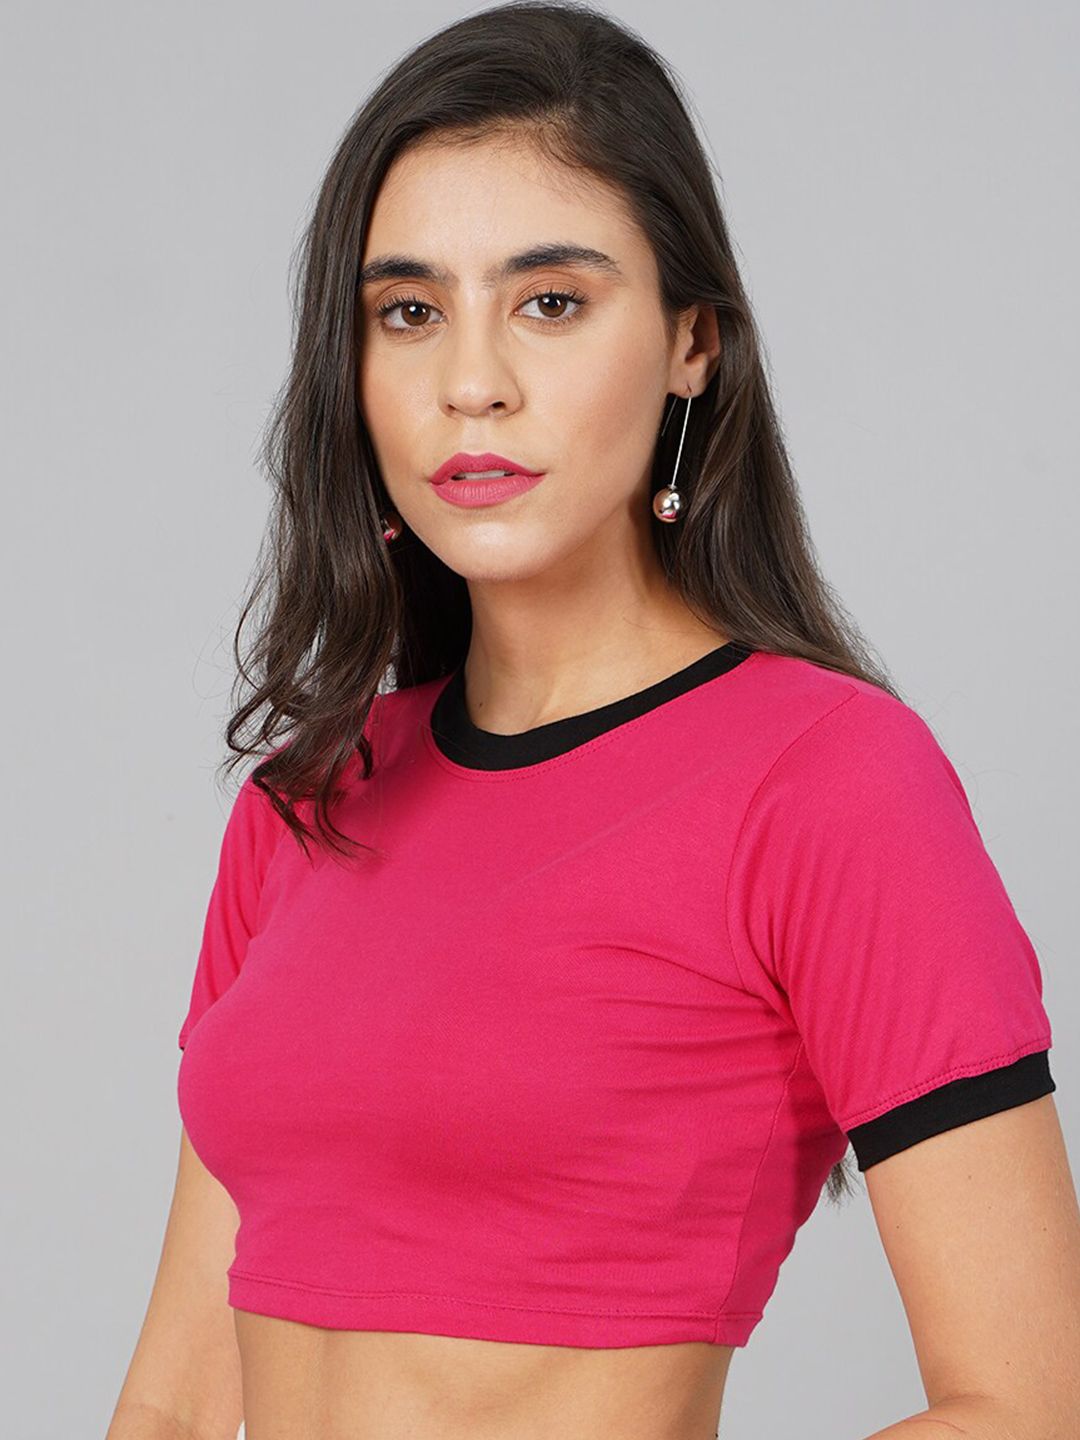 SCORPIUS Women Fuchsia Short Sleeves Fitted Crop Top Price in India